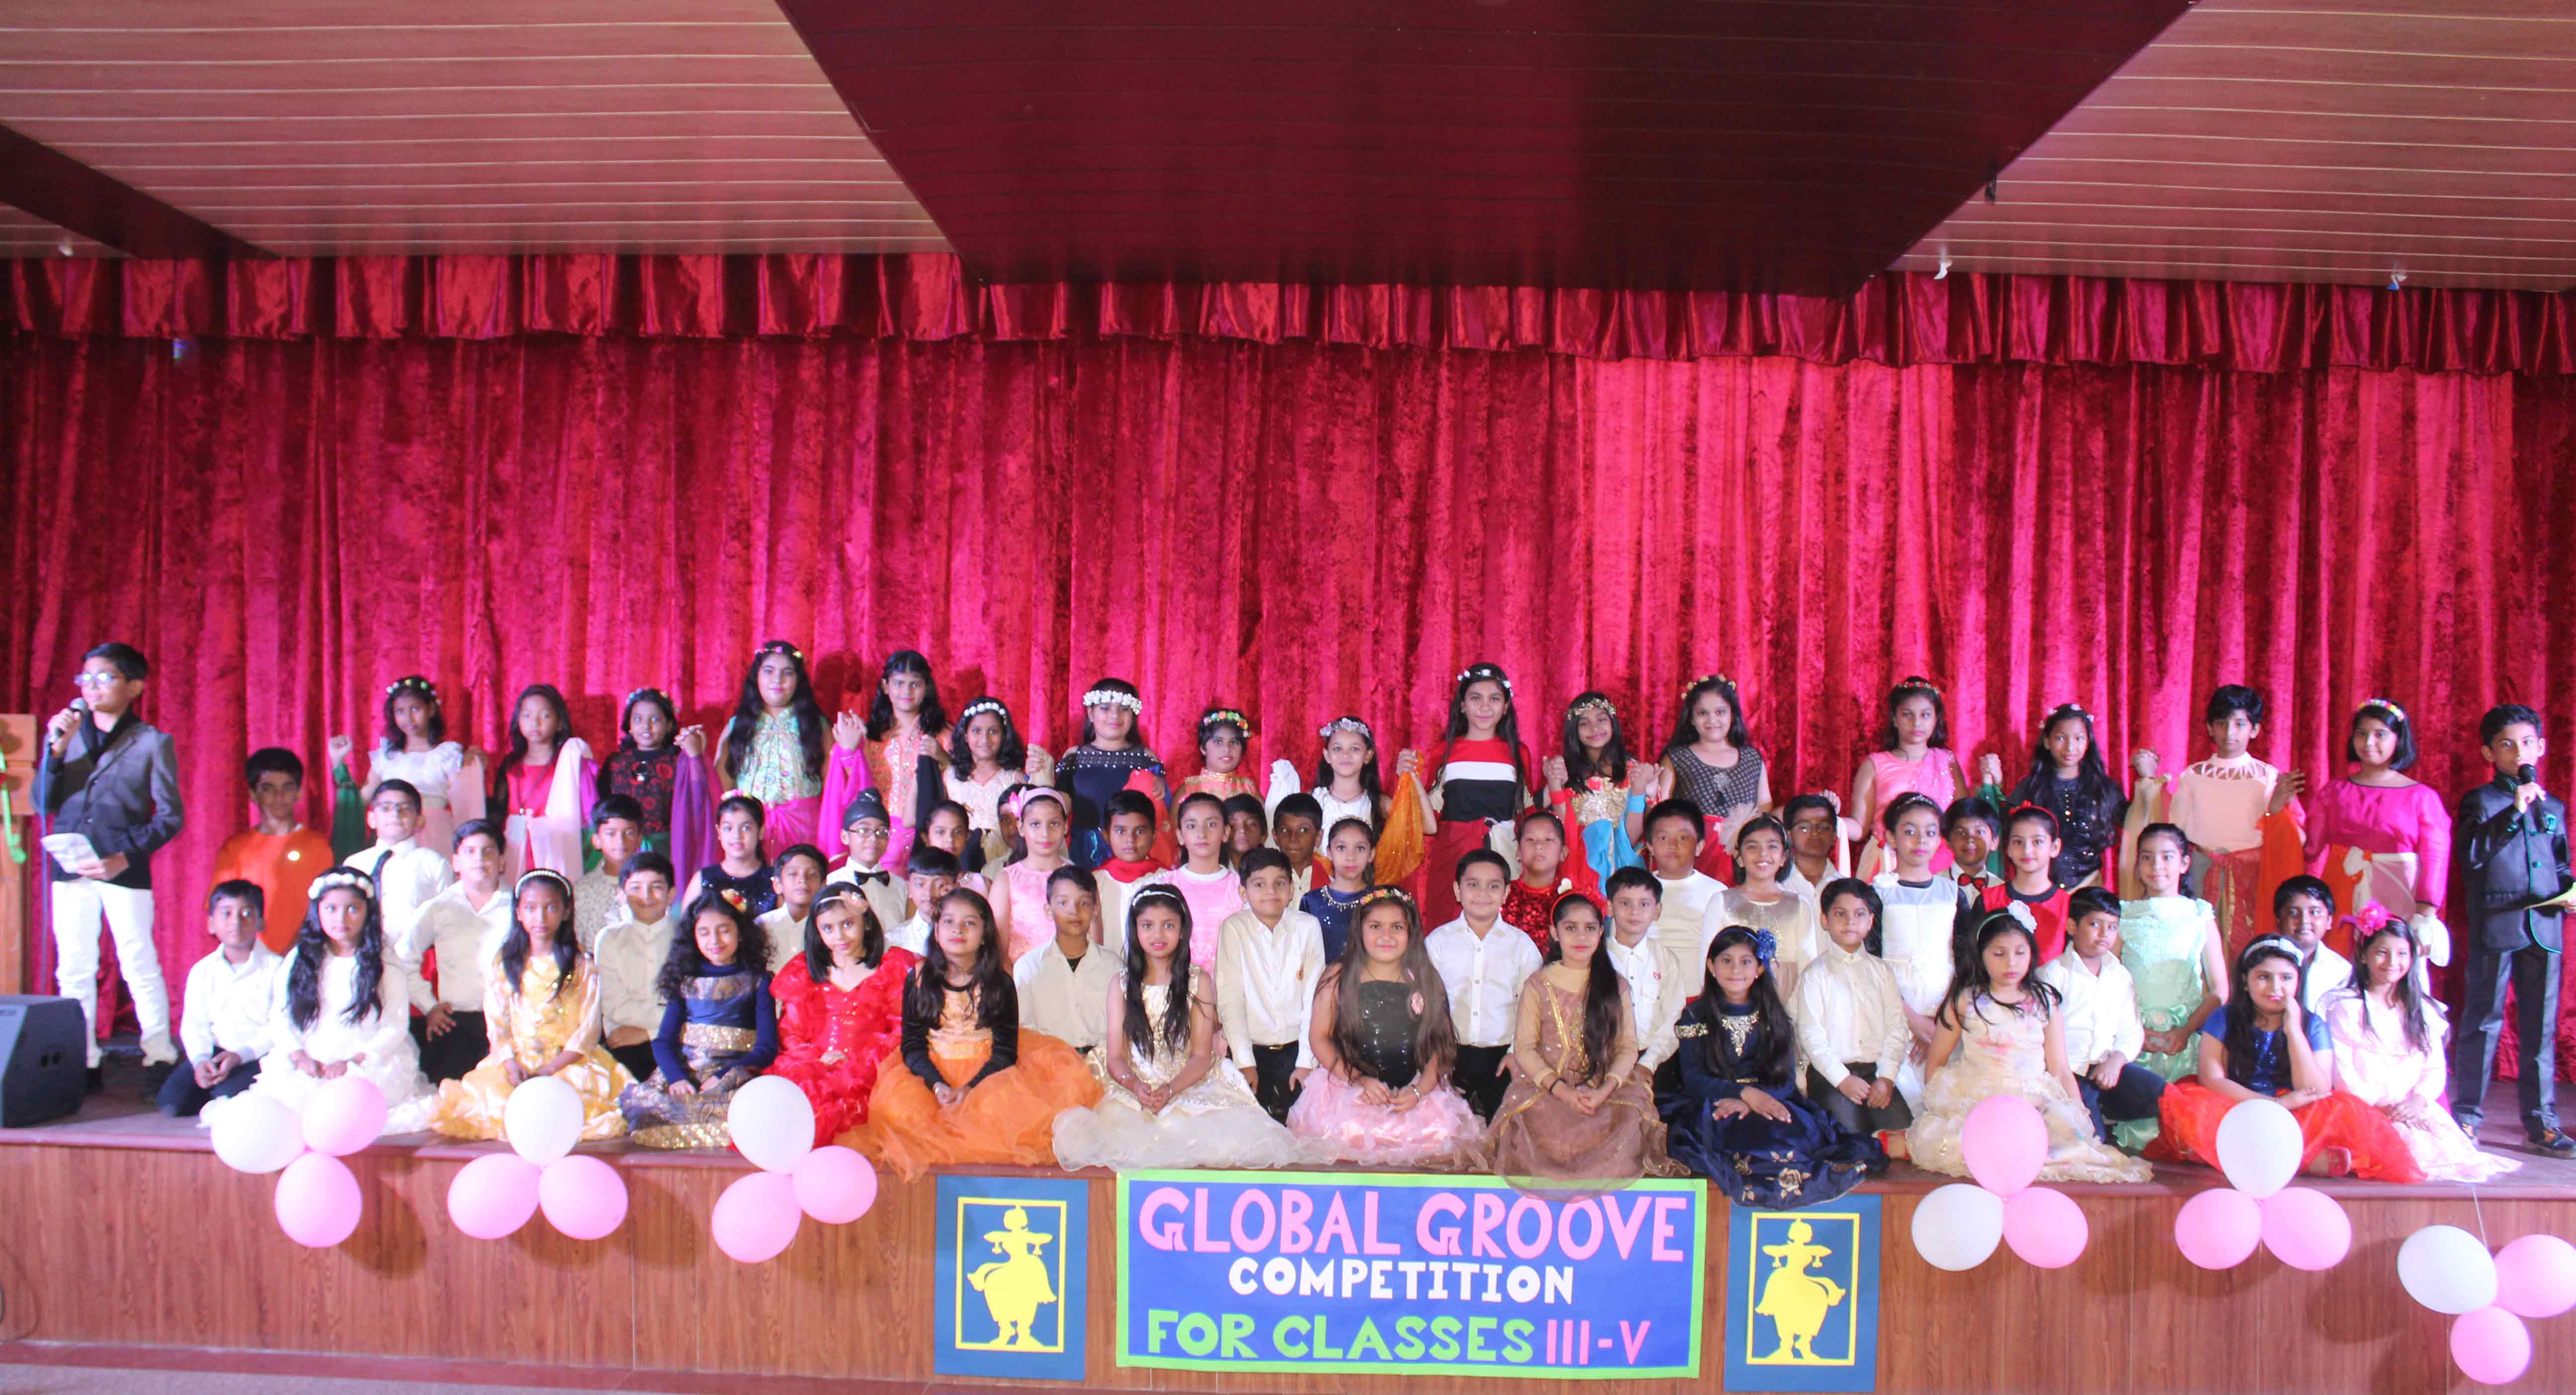 Inter Class Global Groove Competition for classes III - V